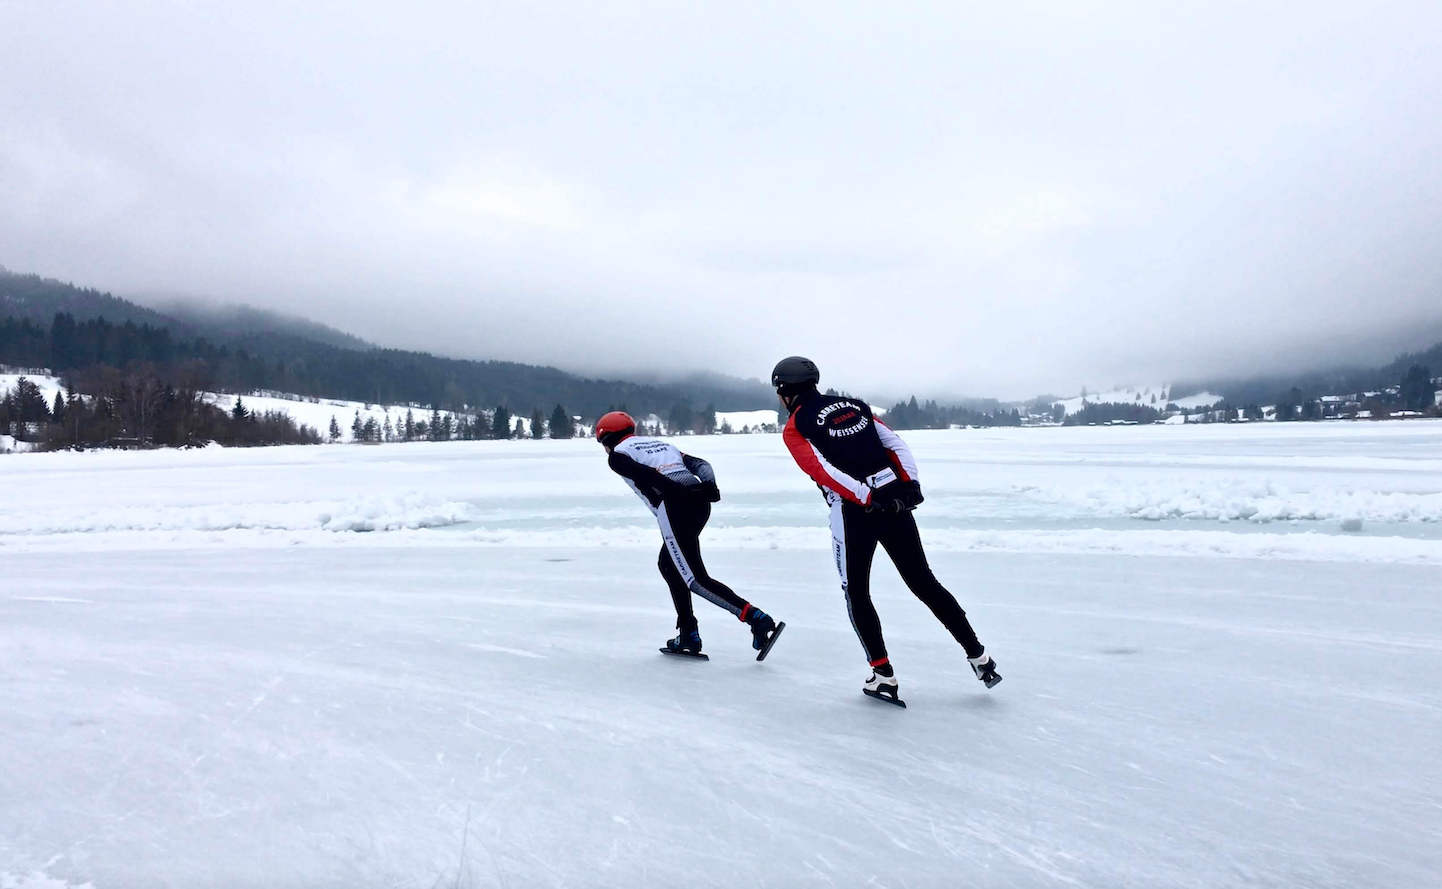 Speed skating on Weissensee is a popular winter activity in Carinthia